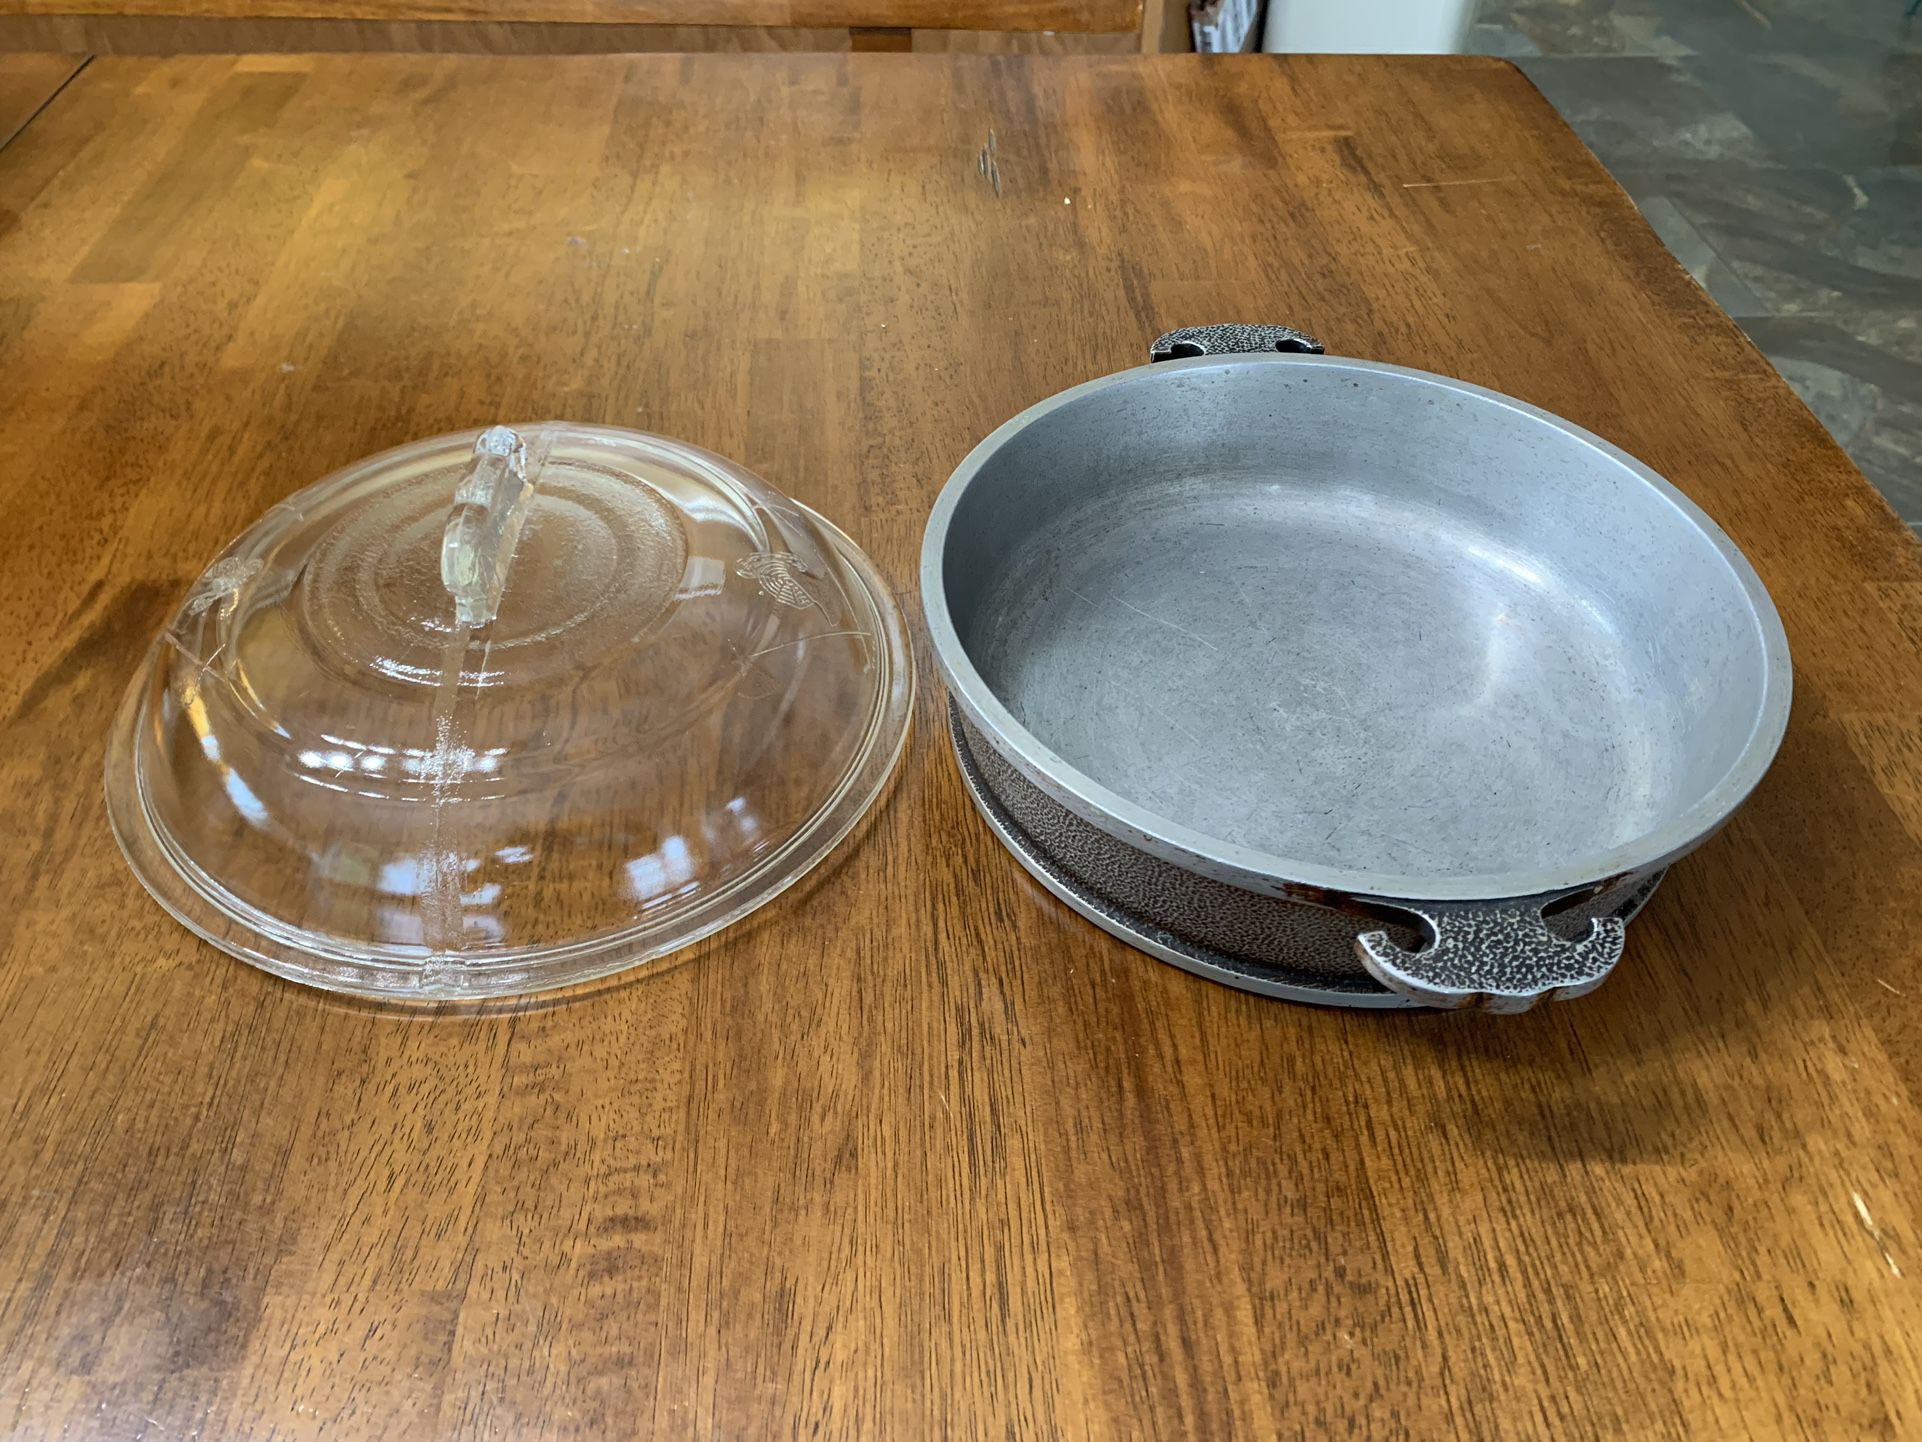 Imusa Caldero 3-Piece Cookware Set, Silver for Sale in Los Angeles, CA -  OfferUp